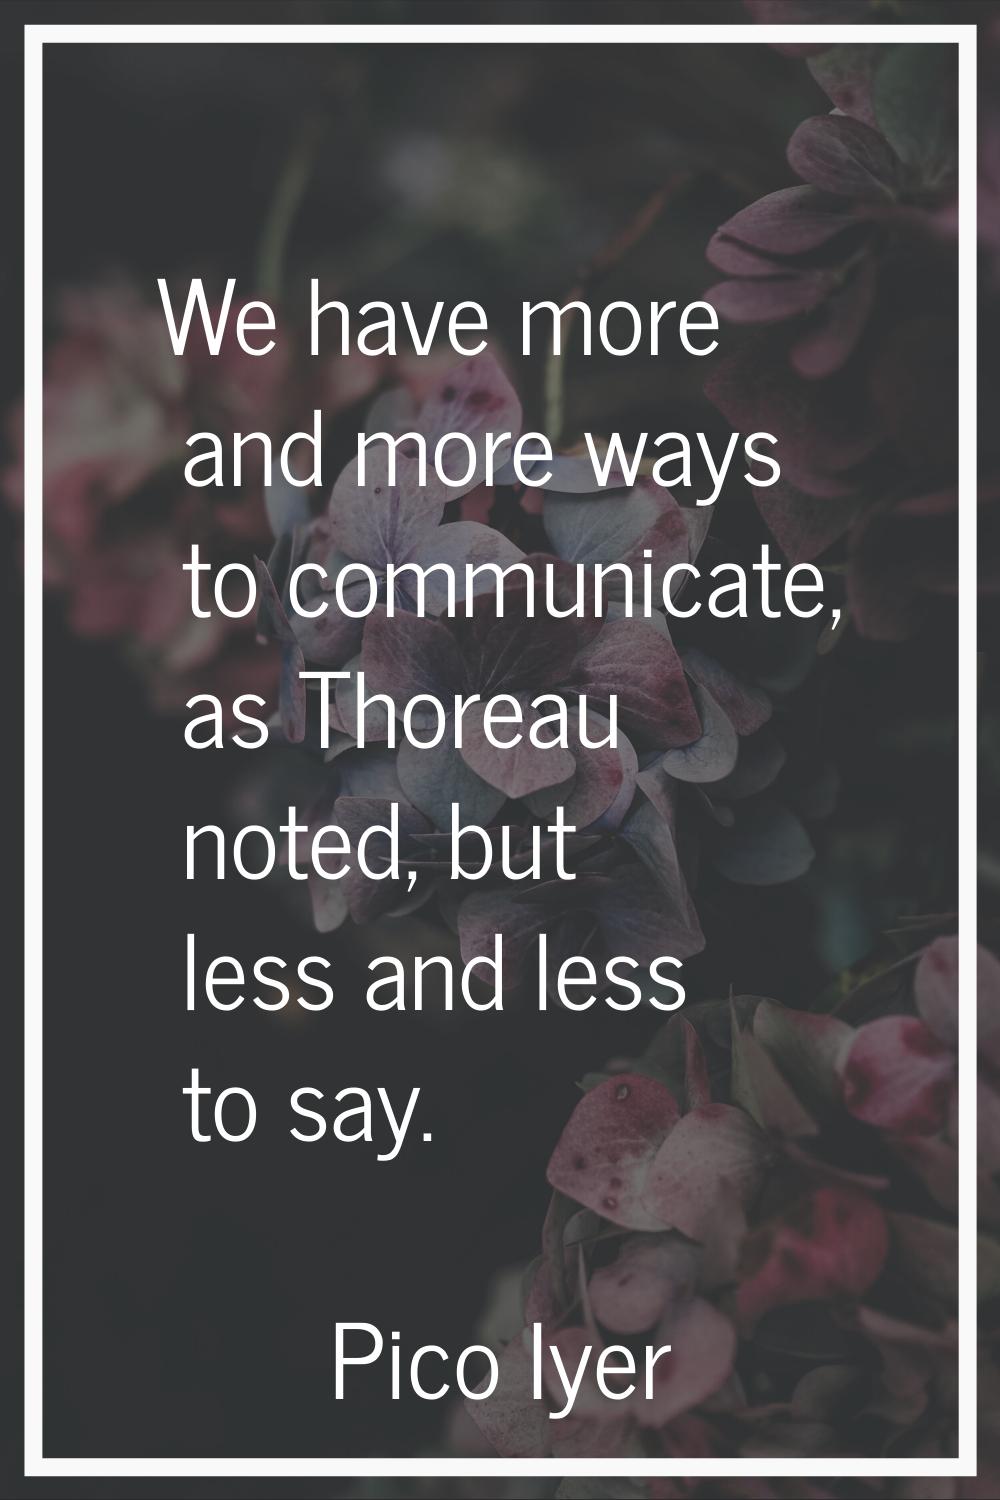 We have more and more ways to communicate, as Thoreau noted, but less and less to say.